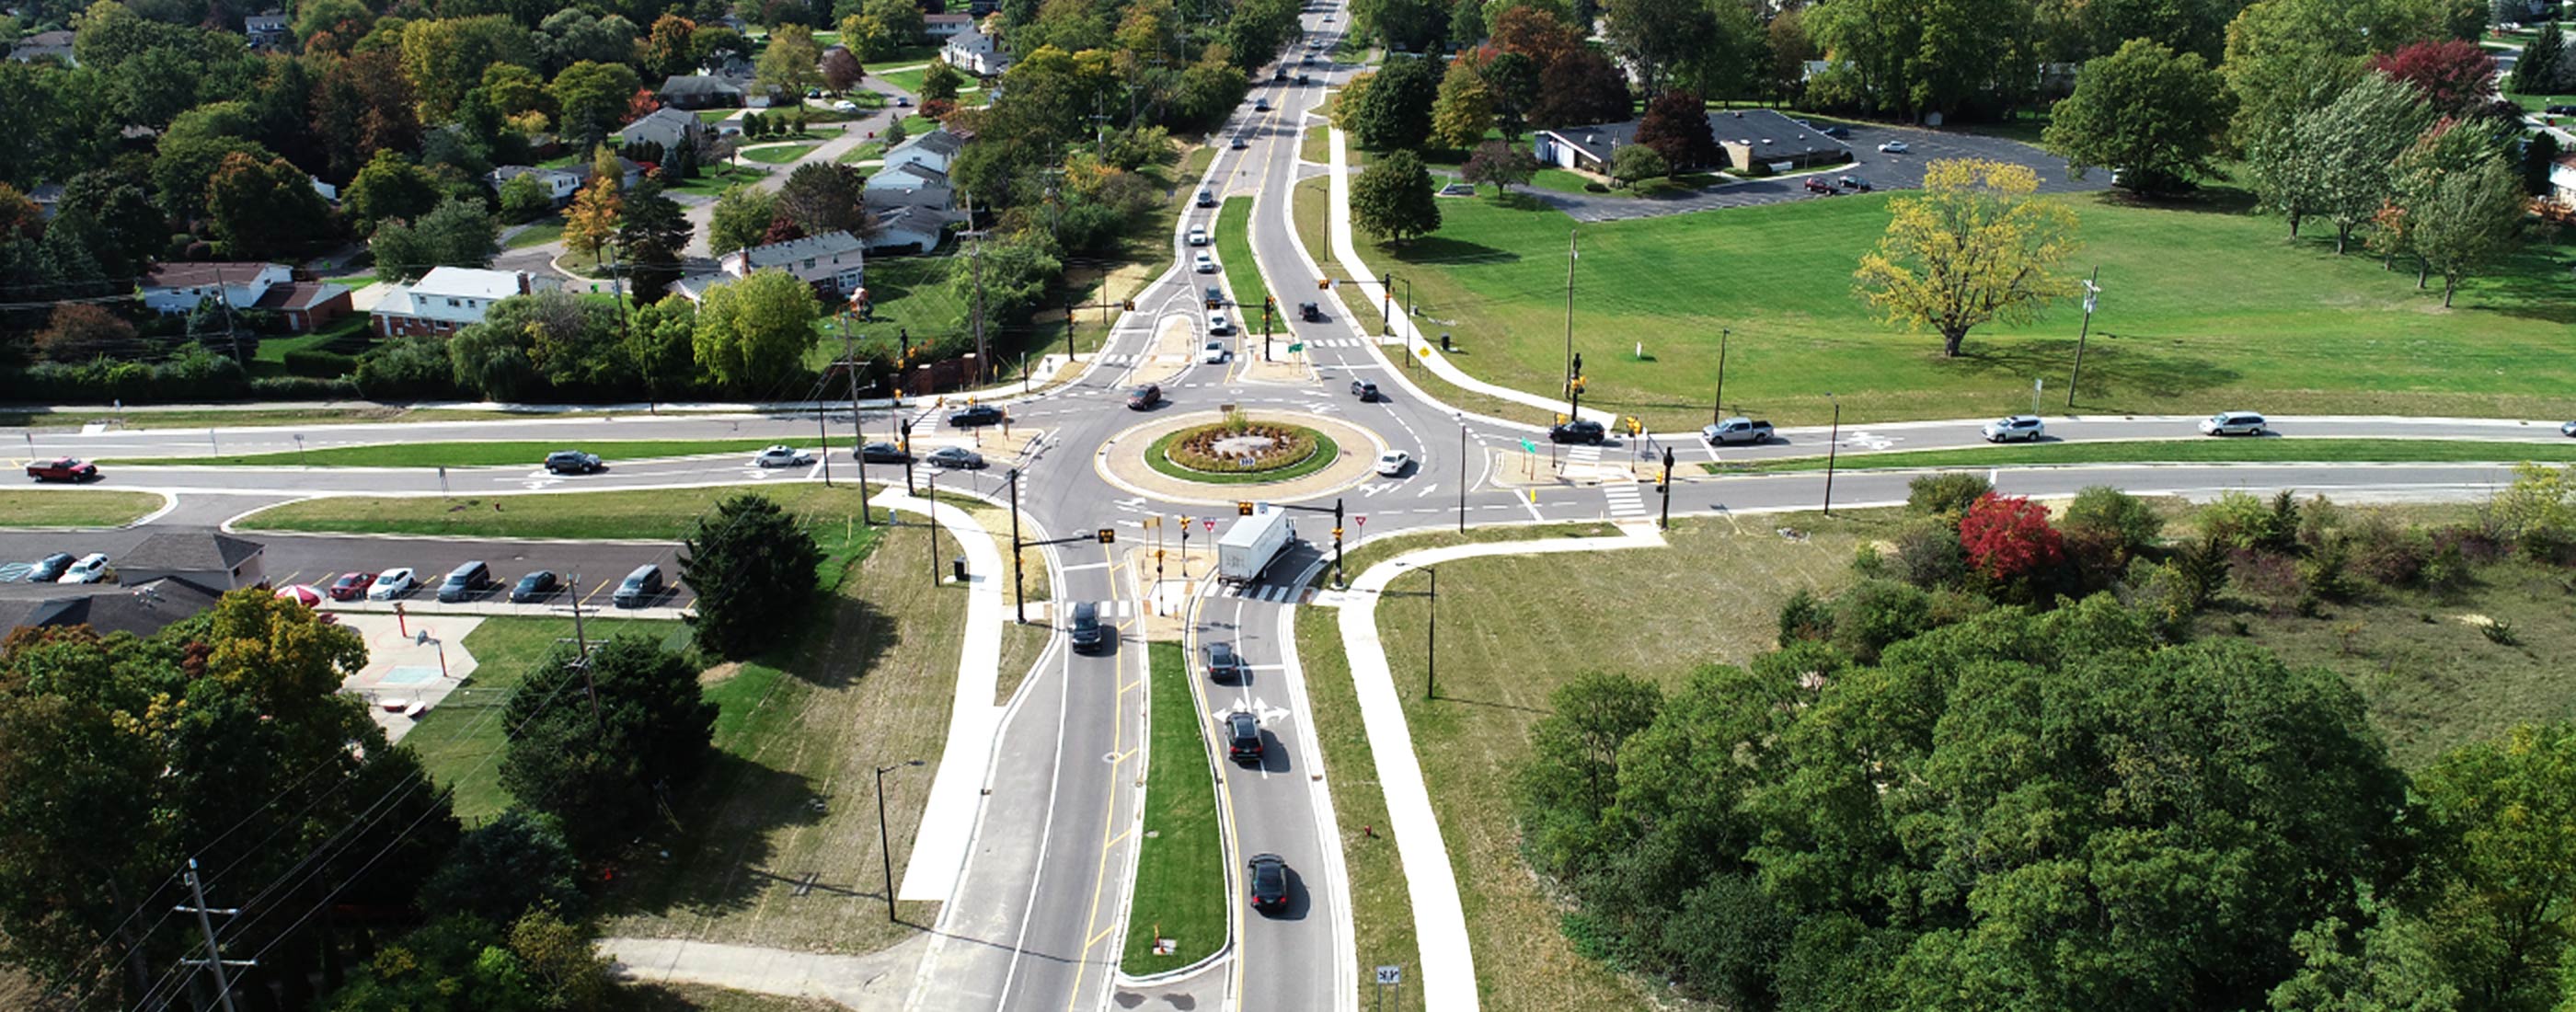 Distant aerial image of Maple & Middlebelt Road Roundabout in West Bloomfield, MI.